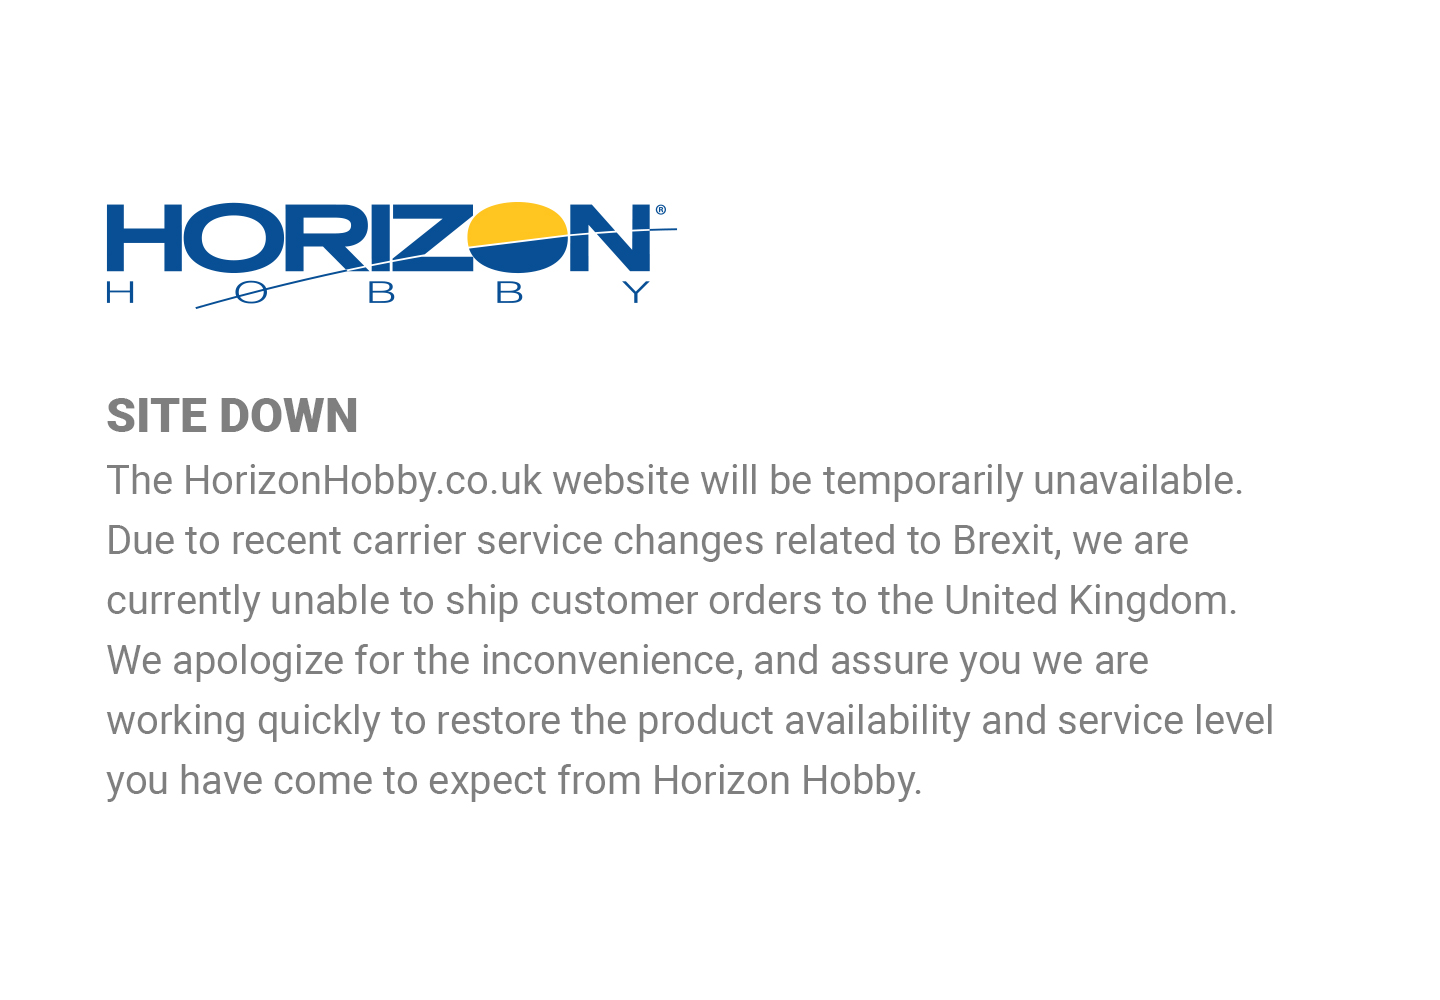 The HorizonHobby.co.uk website will be temporarily unavailable. Due to recent carrier service changes related to Brexit, we are currently unable to ship to customer orders to the United Kingdom.